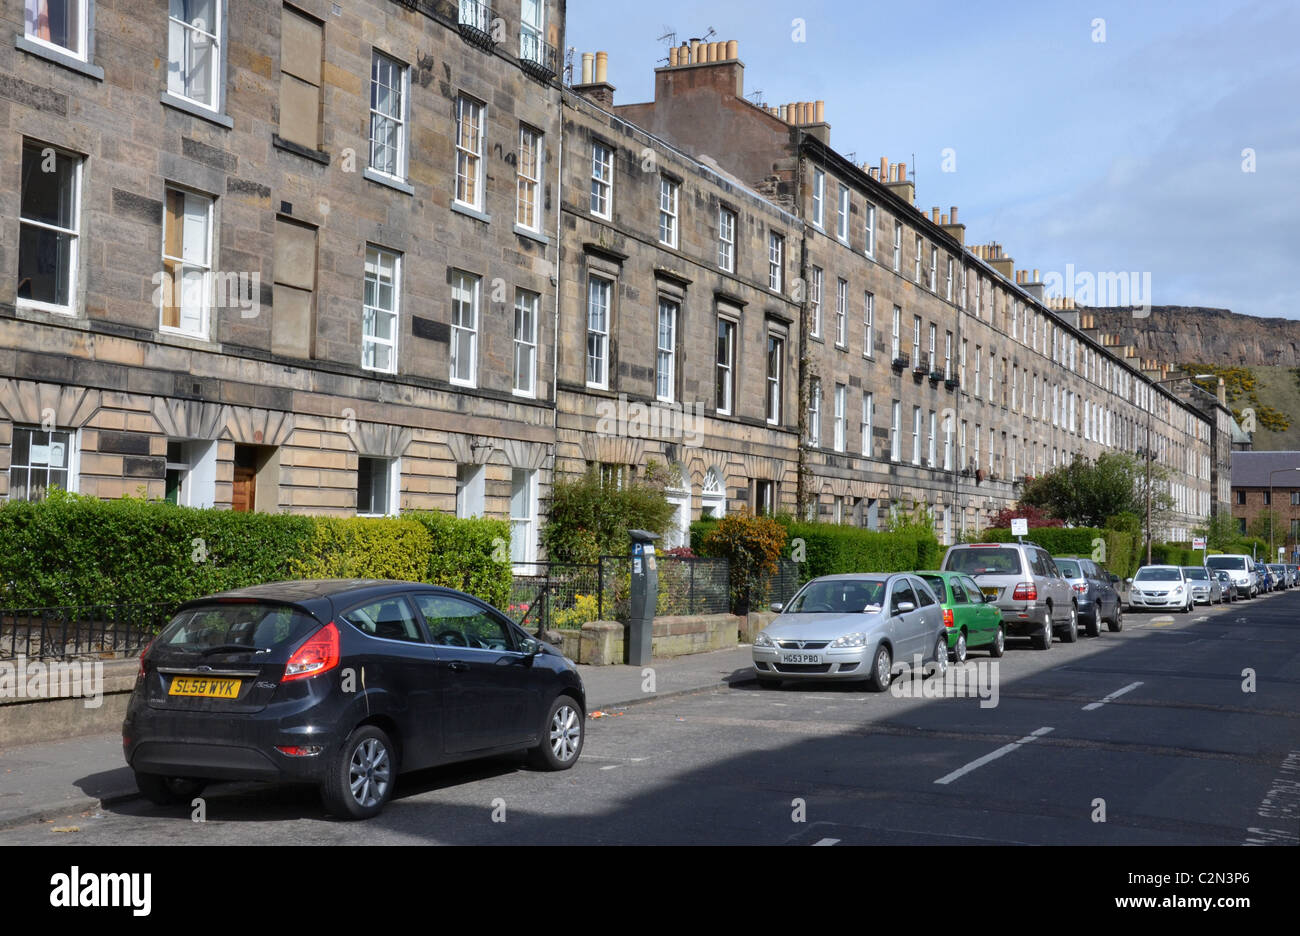 Rankeillor Street in the Newington area of Edinburgh and its also the street where David Nicholls novel 'One Day' begins. Stock Photo